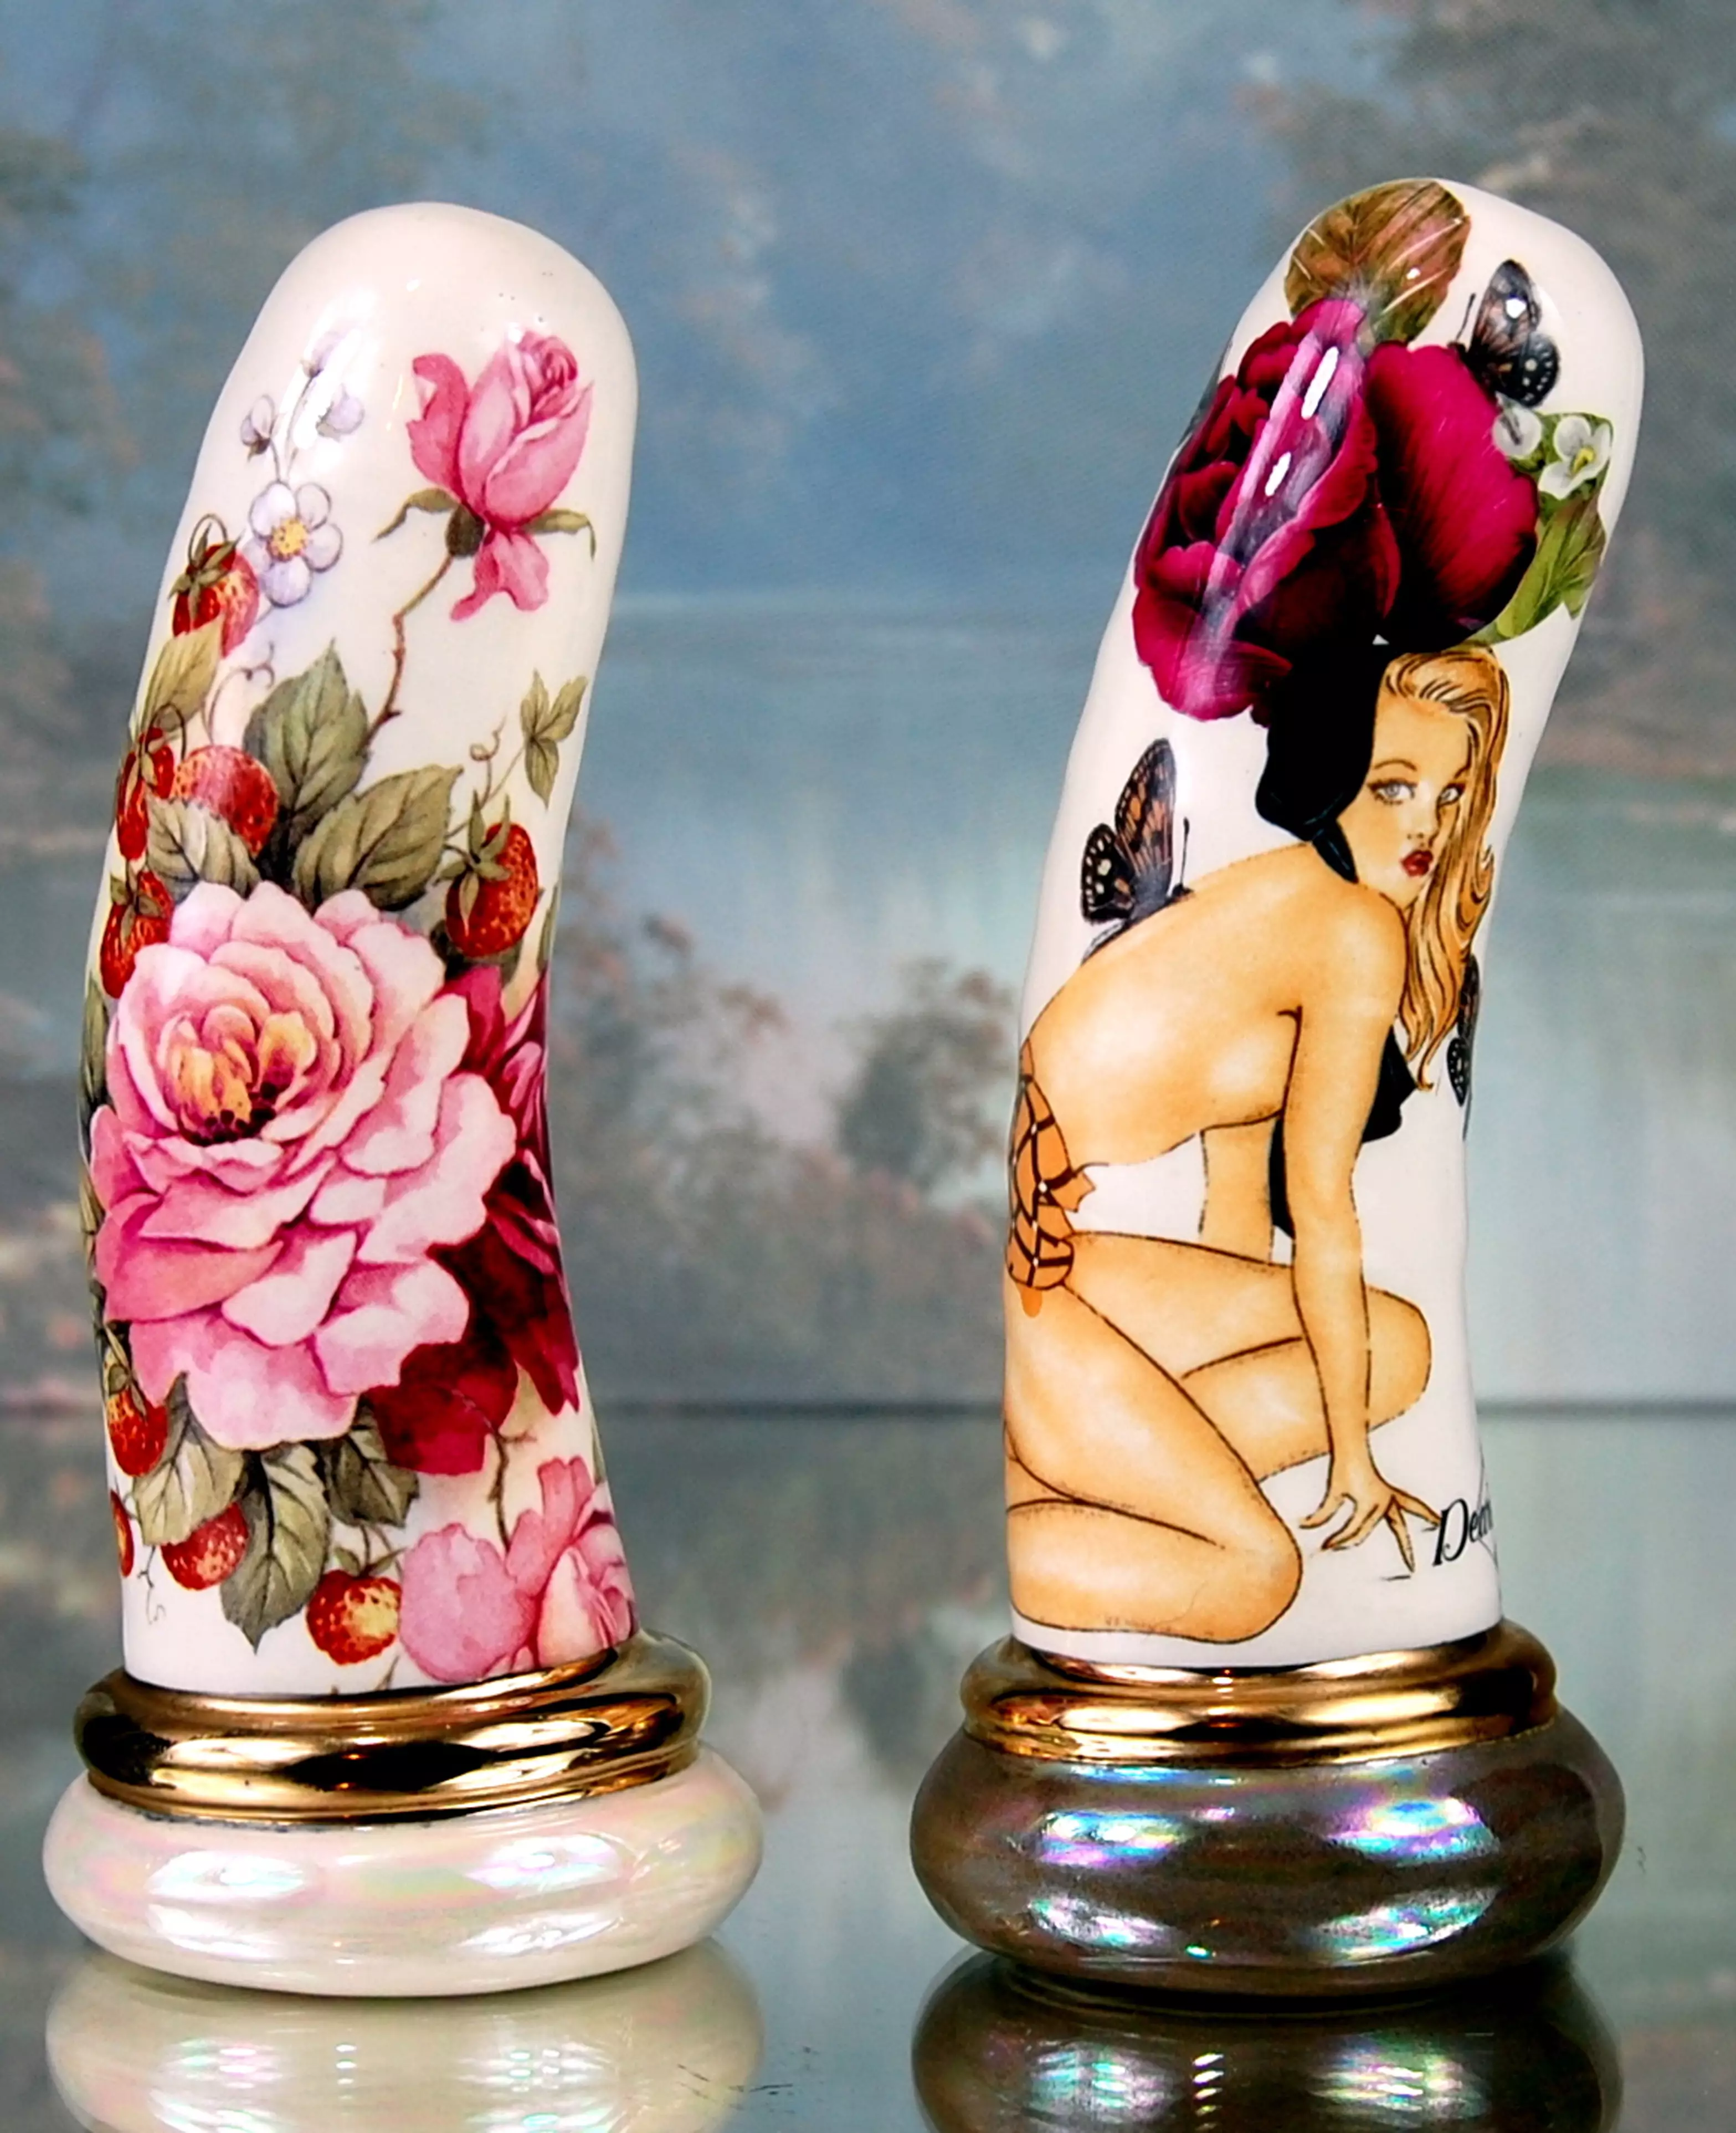 The ornate hand-painted designs are created and sold by Brighton erotic boutique, She Said (